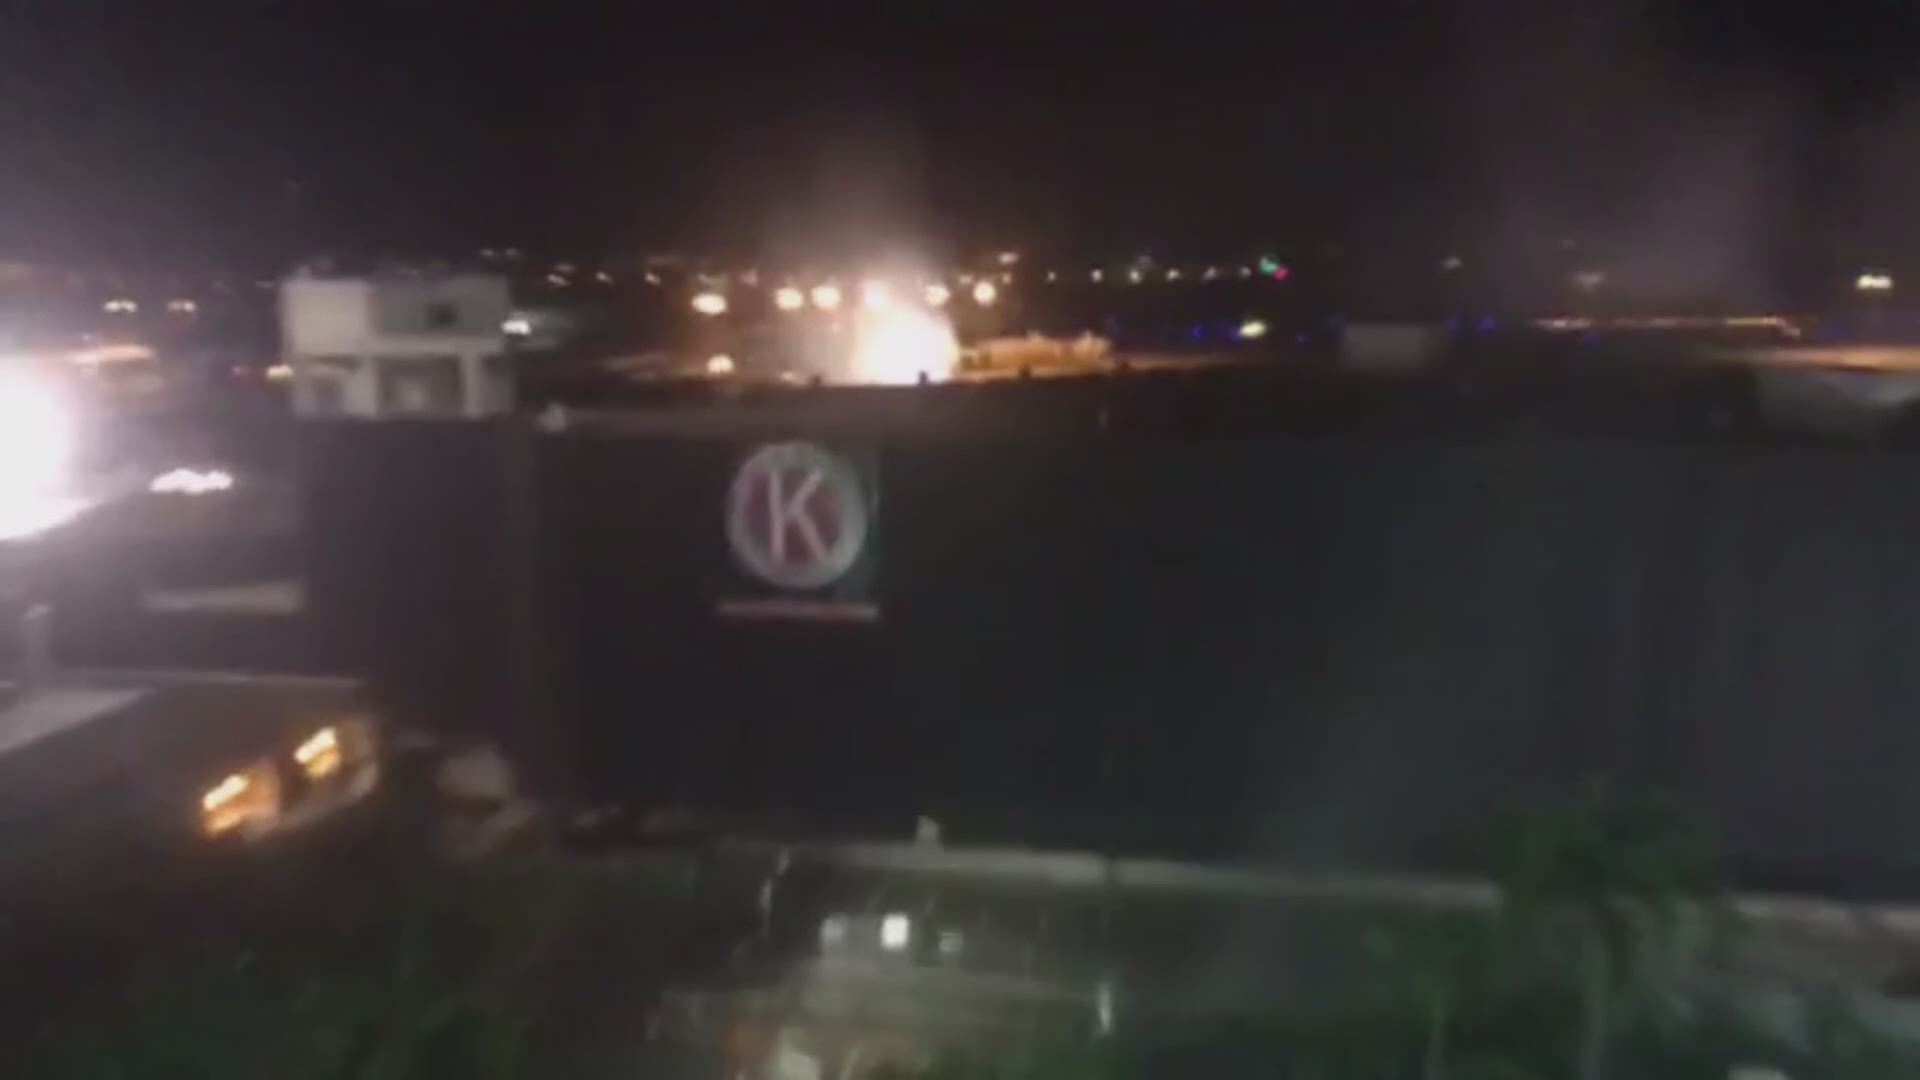 A large boom could be heard early Tuesday morning at Tampa International Airport, where crews demolished the old red side rental car garage around 2 a.m.